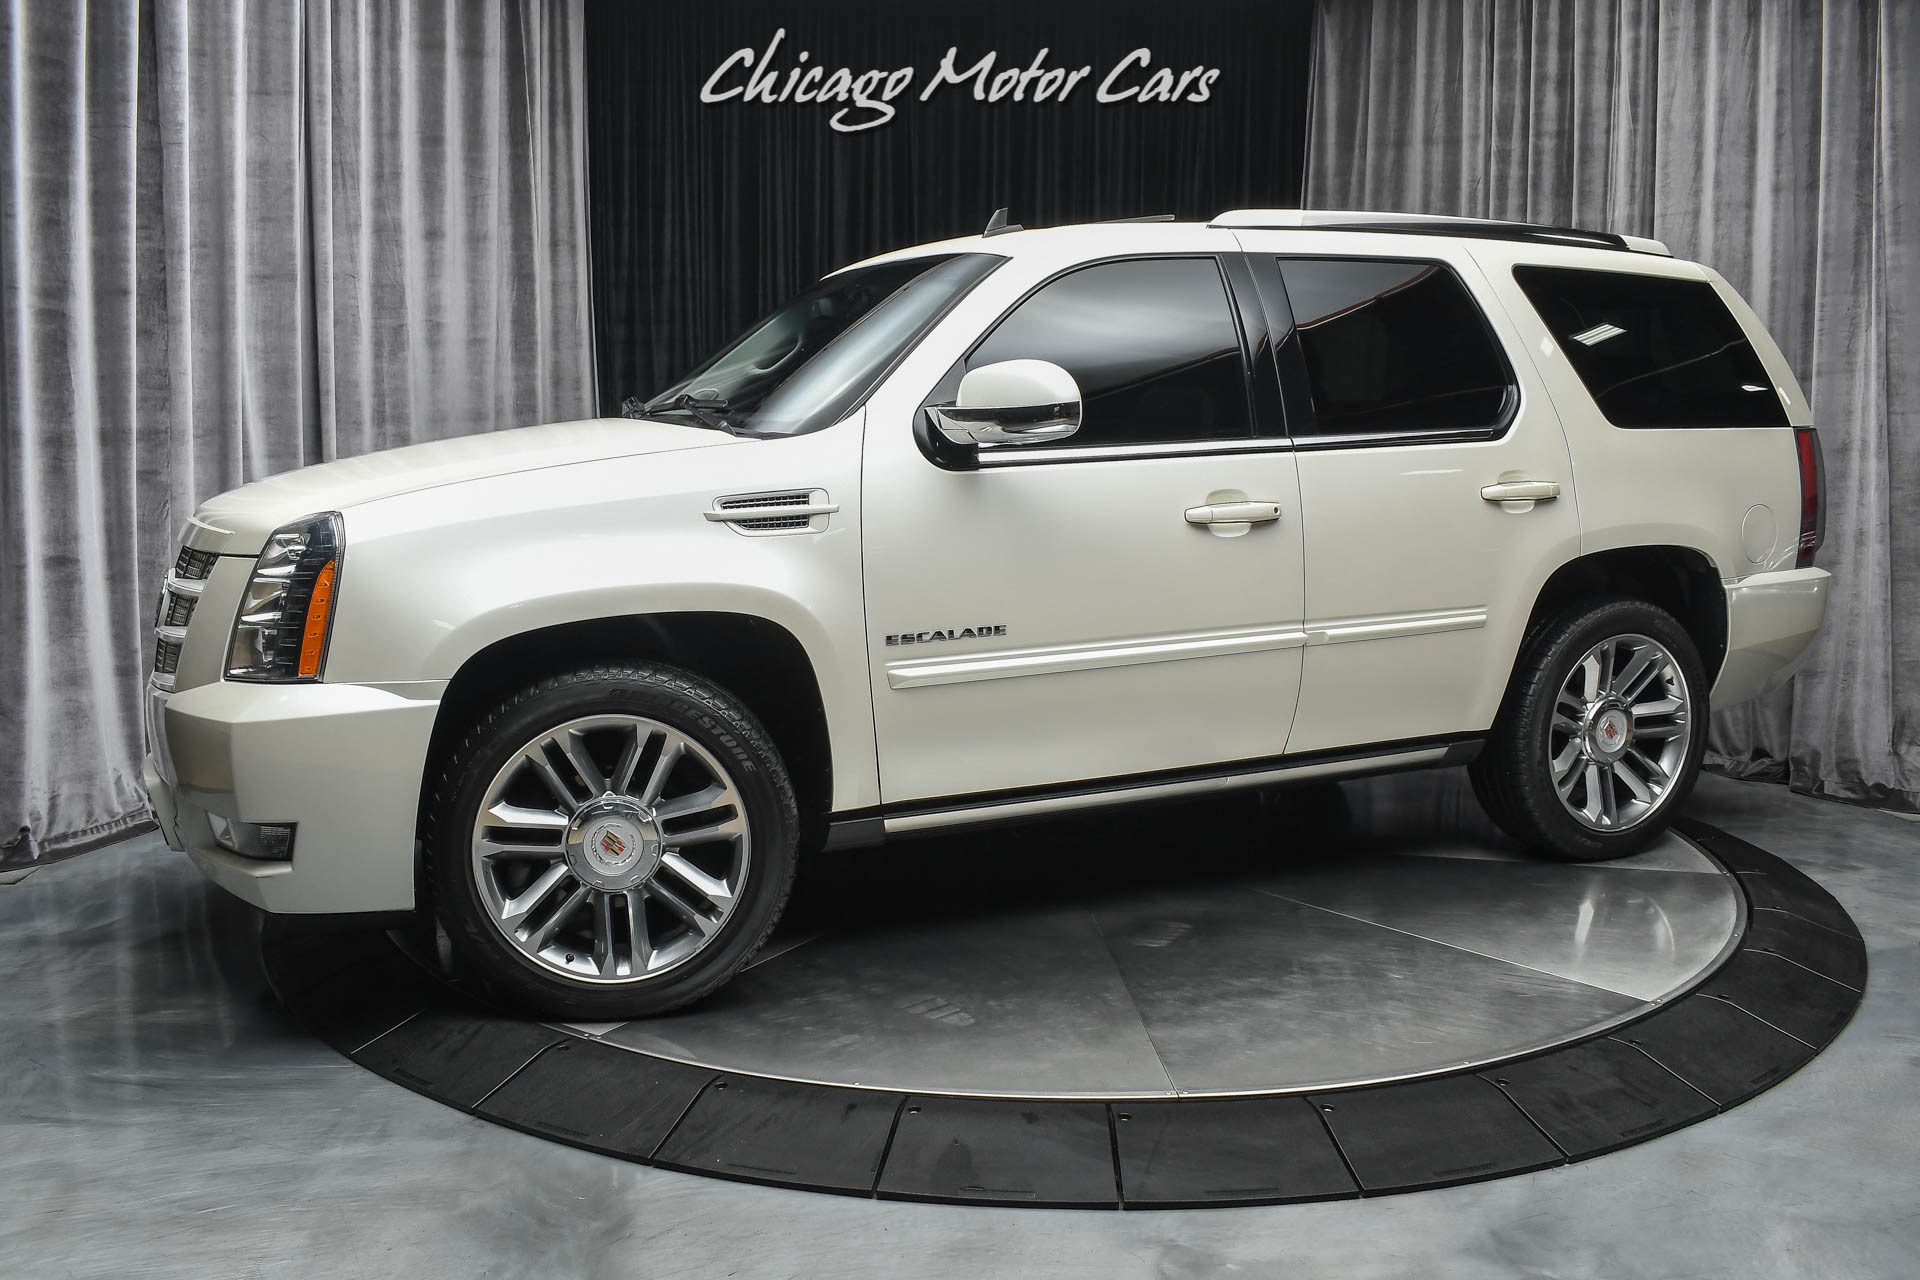 Used 2014 Cadillac Escalade Premium $75k+MSRP! White Diamond Tricoat Paint!  For Sale (Special Pricing) | Chicago Motor Cars Stock #18033